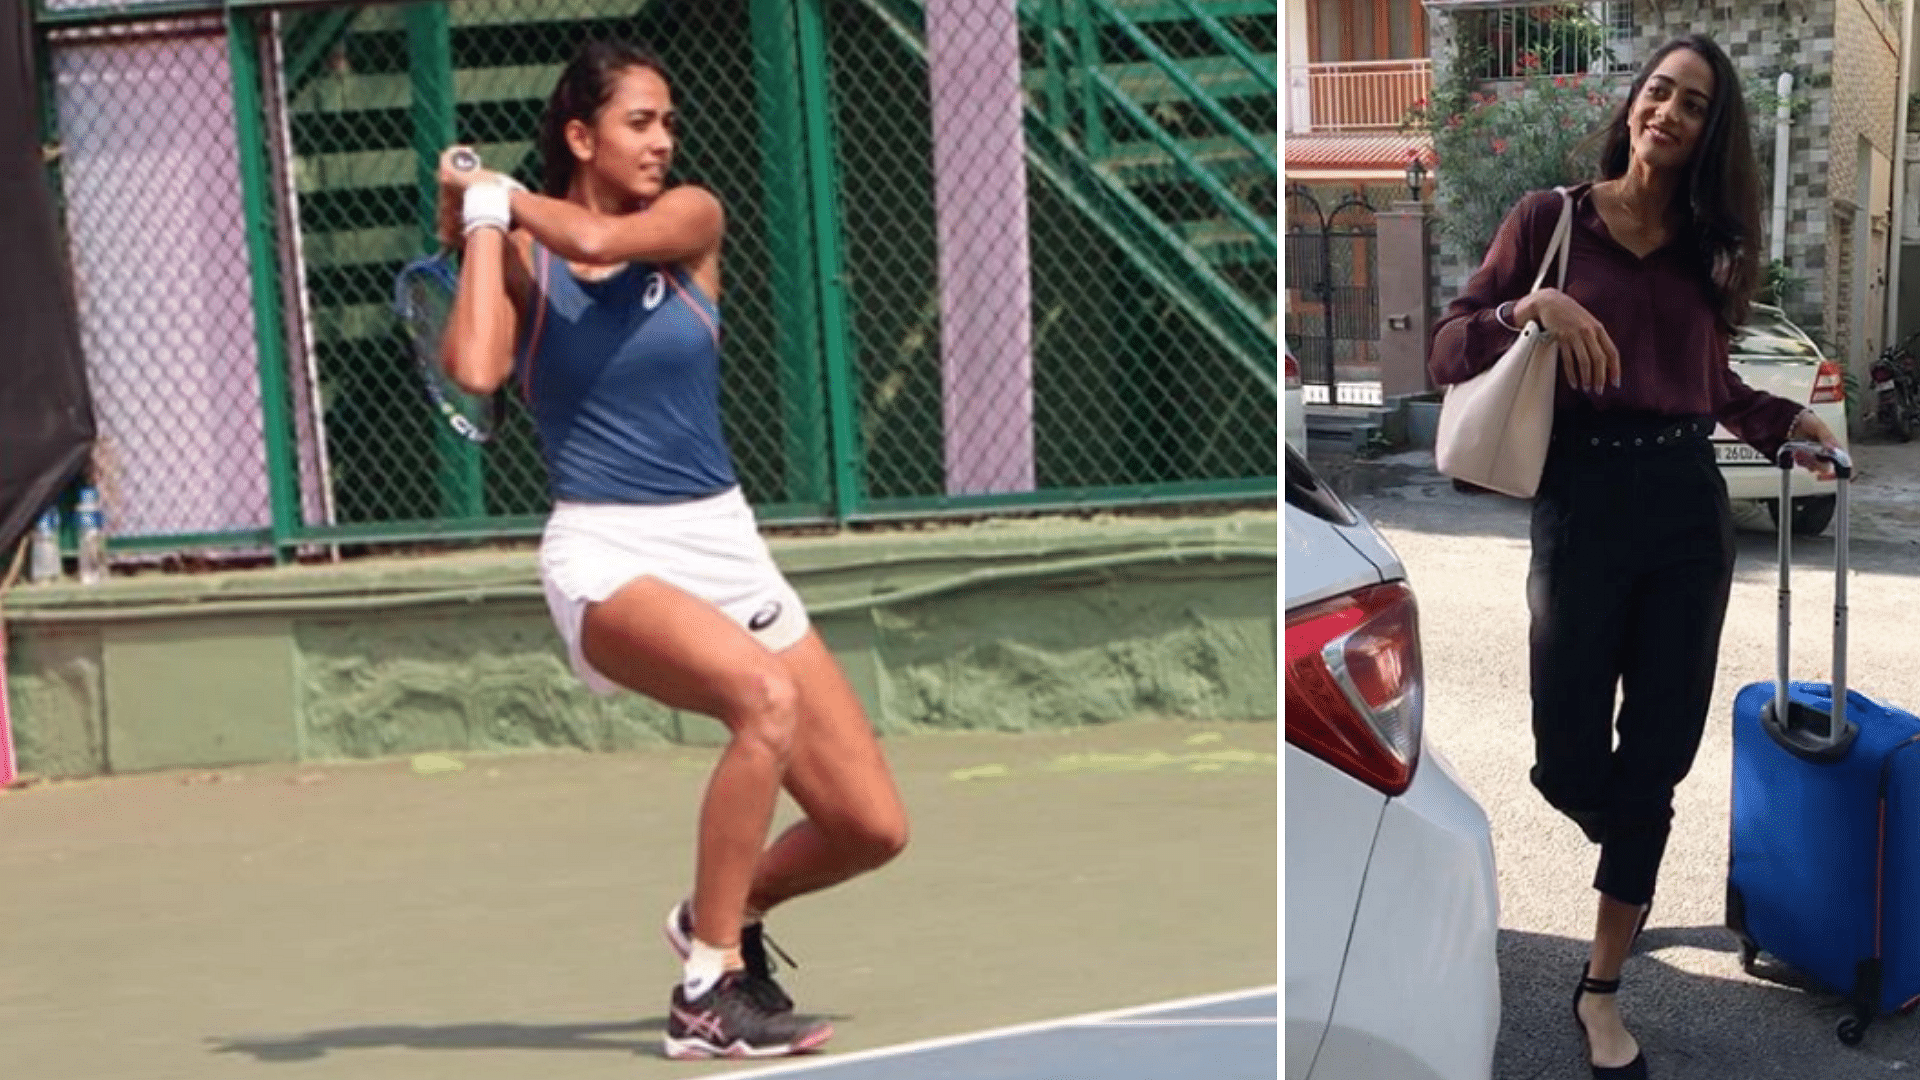 Karman Kaur Thandi is aiming to become the first Indian woman in a Grand Slam main draw since Sania Mirza in 2012.